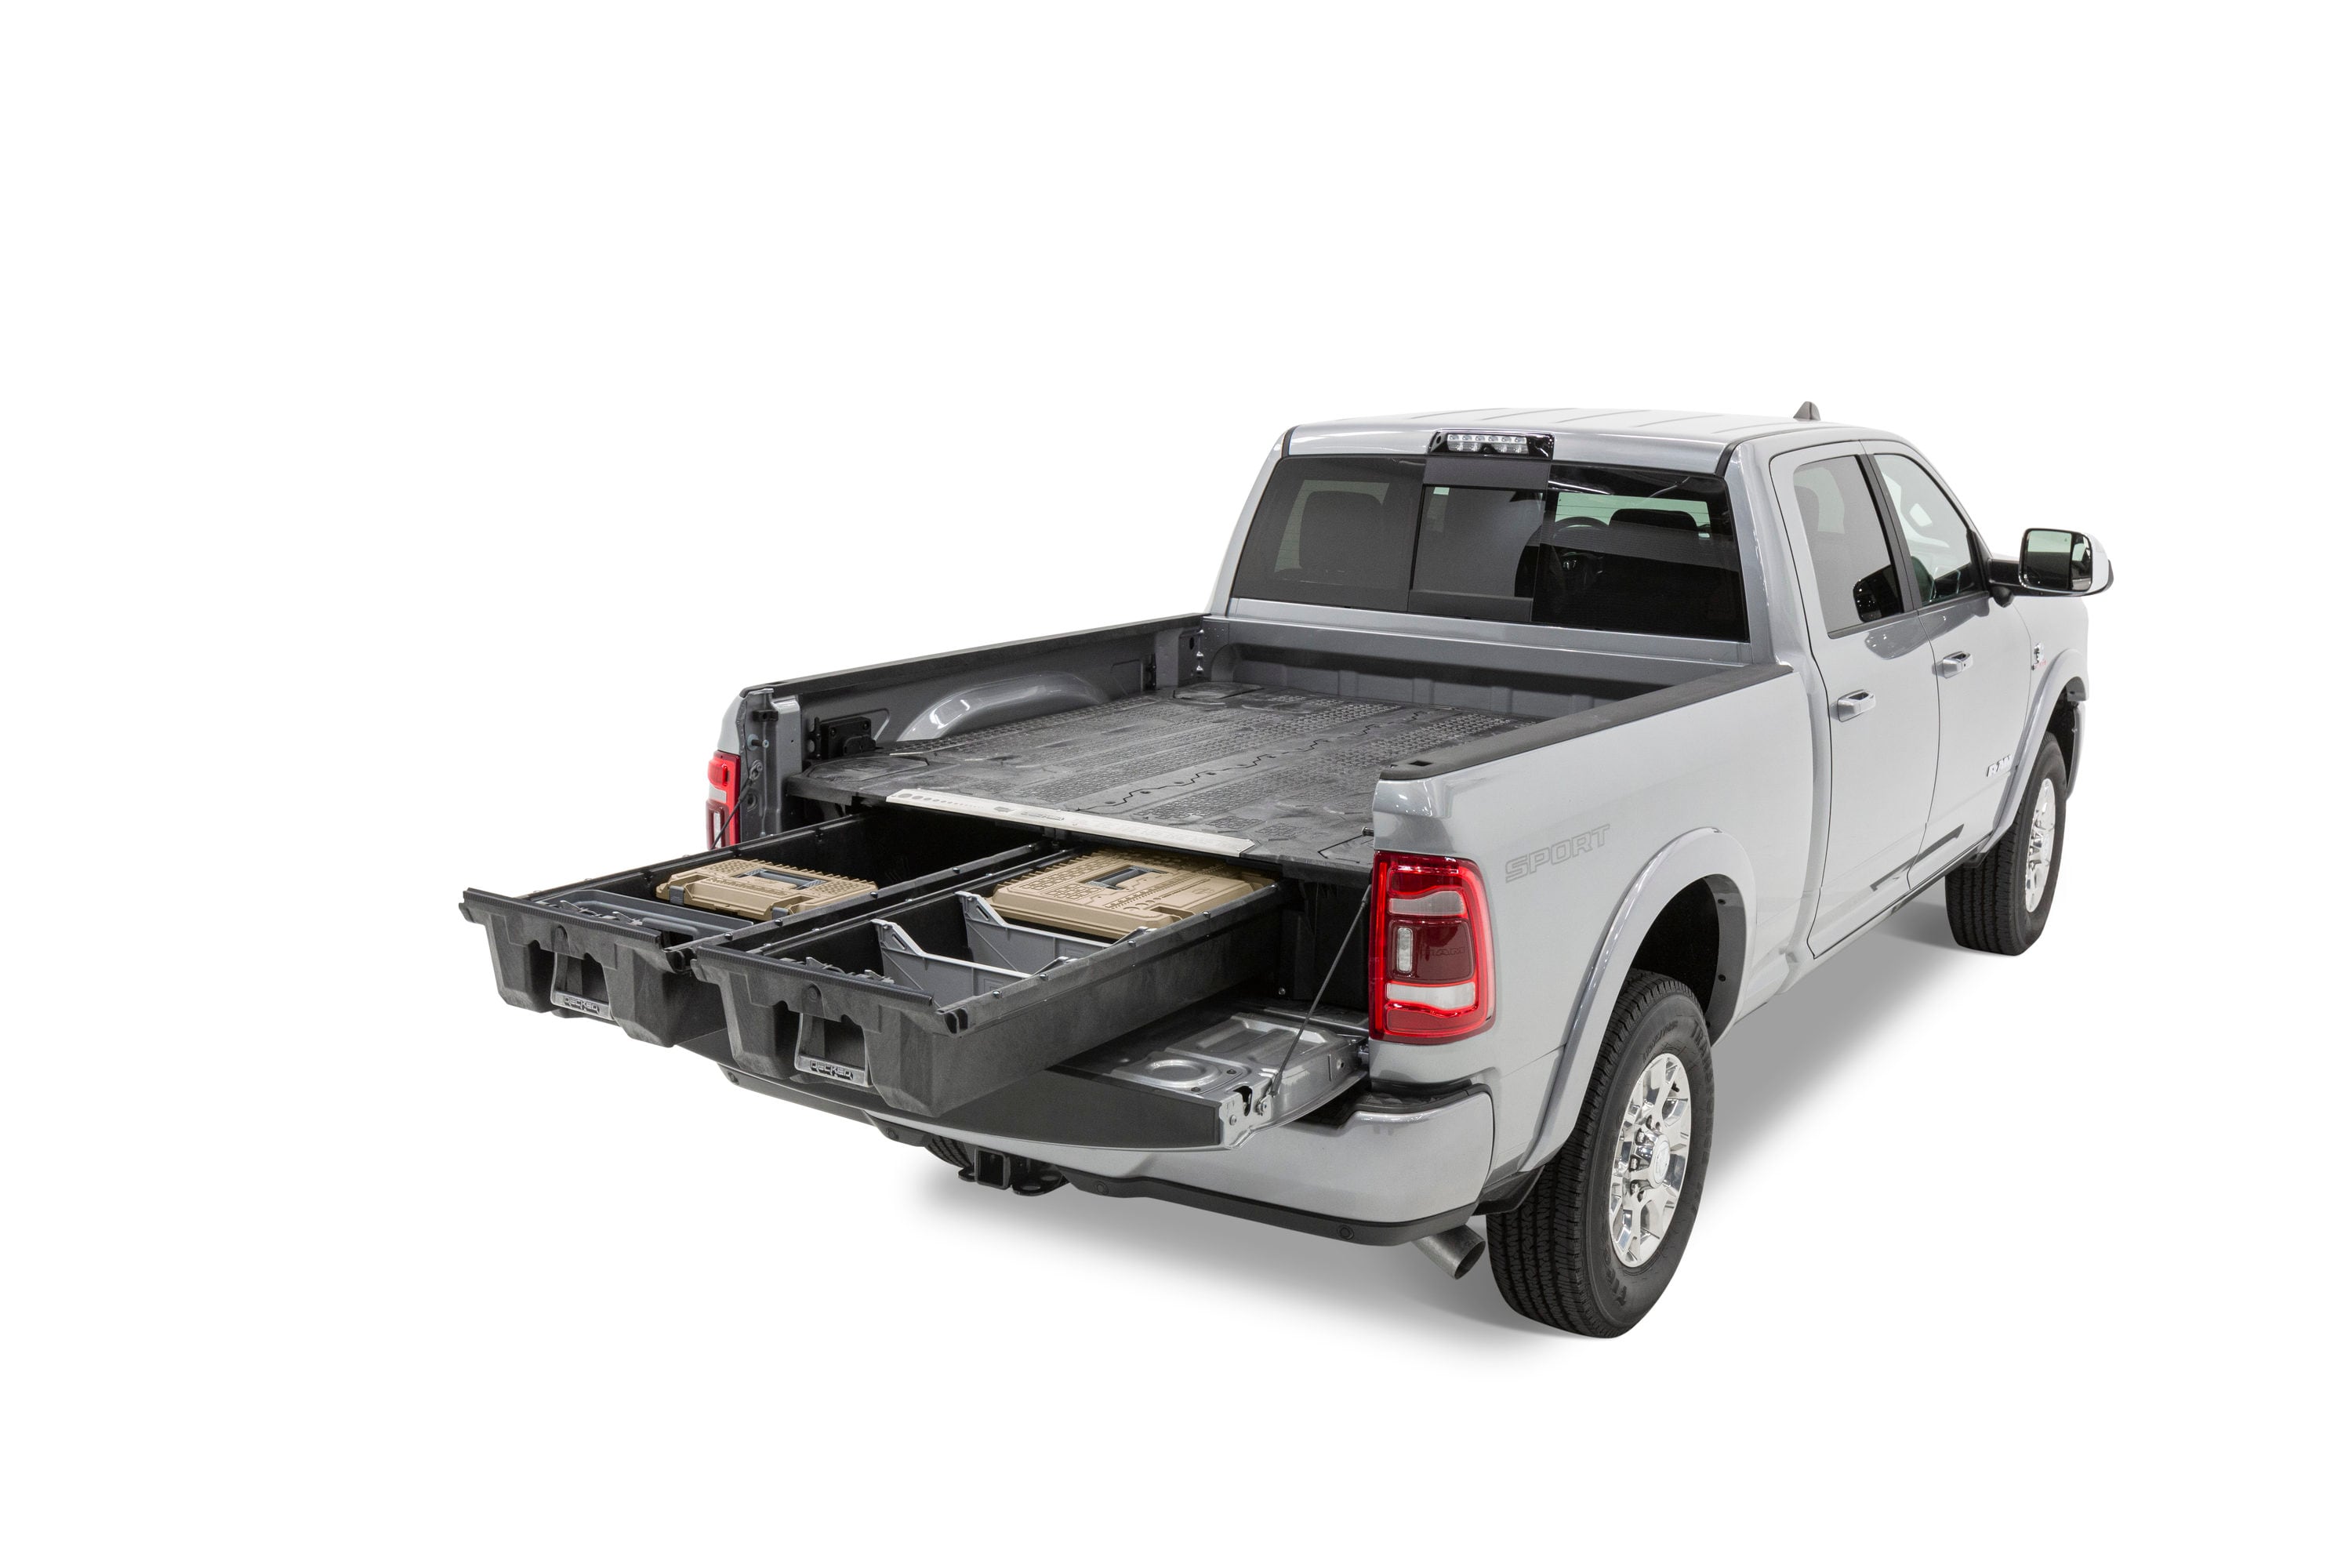 DECKED DECKED Storage System for RAM 1500 (2009-2018) 2500 and 3500 (2010-current) 1500 Classic (2019)- 6-ft 4-in Bed Length in Black | DR4